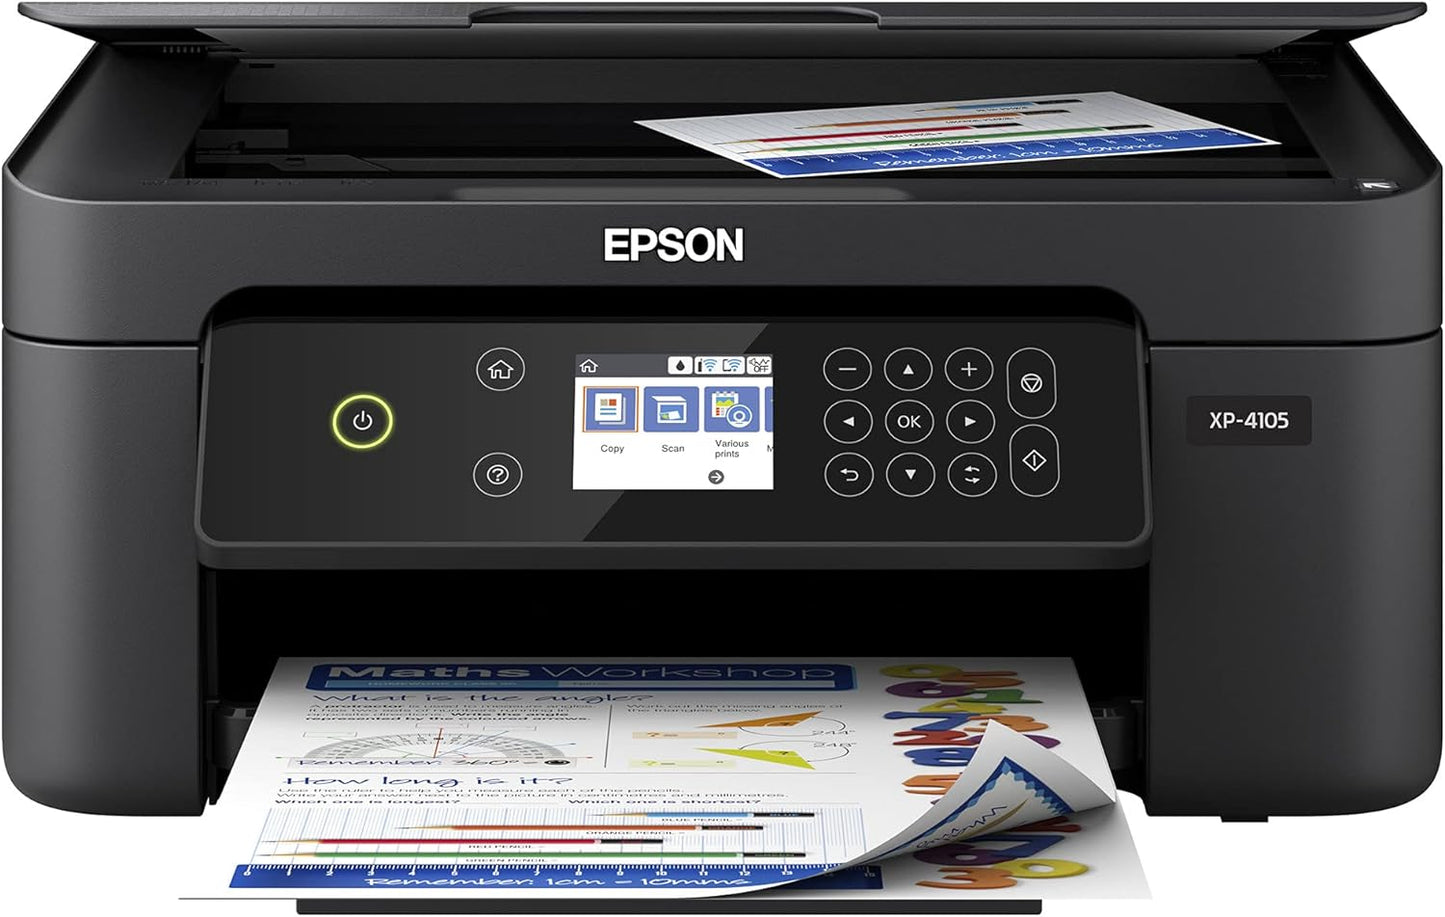 Epson Expression Home XP-4105 Wireless All-in-One Color Inkjet Printer, Black - Print Copy Scan - 10.0 ppm, 5760 x 1440 dpi, 2.4" LCD, Auto 2-Sided Printing, Voice Activated, DAODYANG Printer_Cable